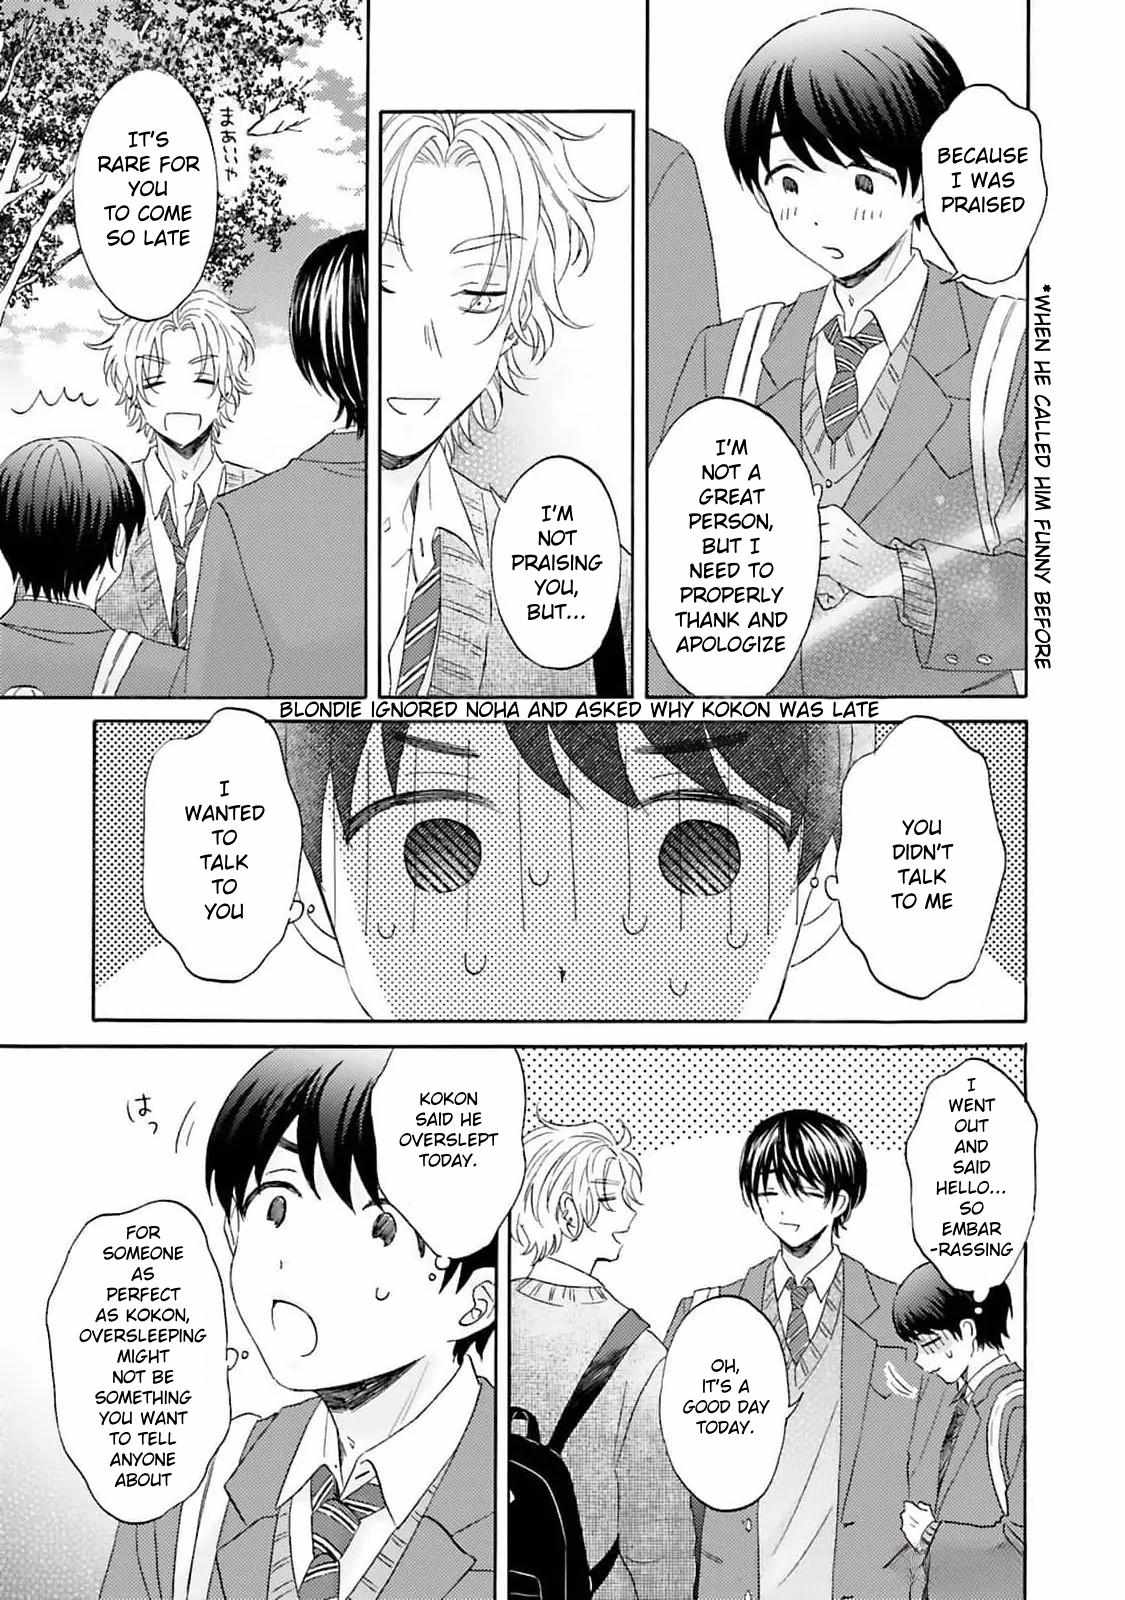 My Cutie Pie -An Ordinary Boy And His Gorgeous Childhood Friend- 〘Official〙 - 5 page 27-94ed146b